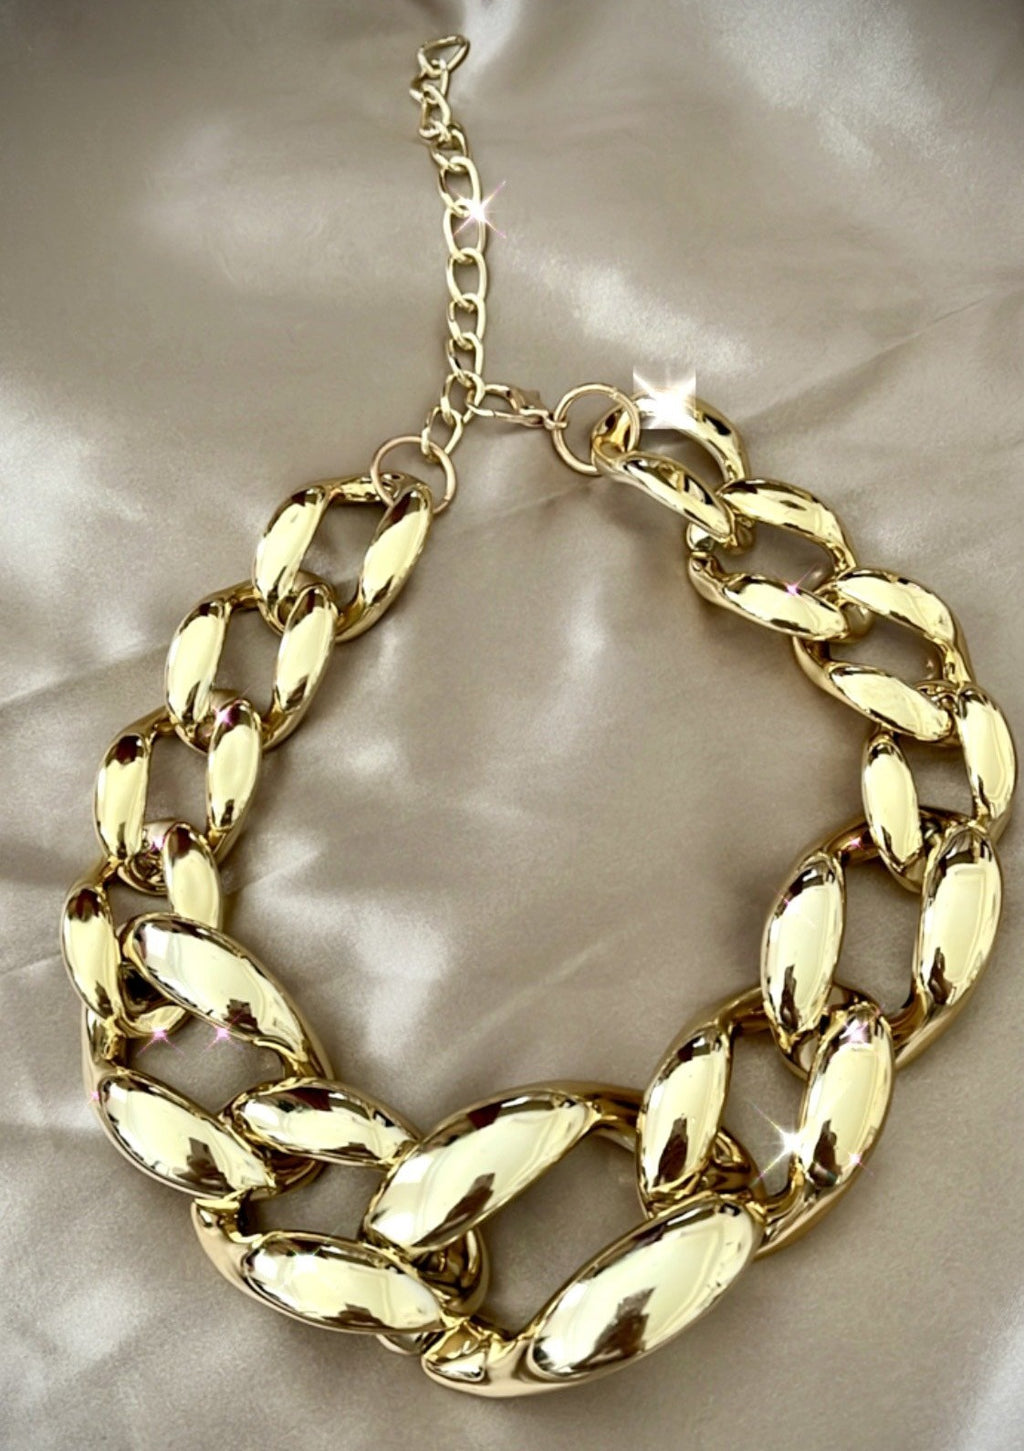  FAY & LOUIS Chunky Gold Chain Big Link Necklaces for